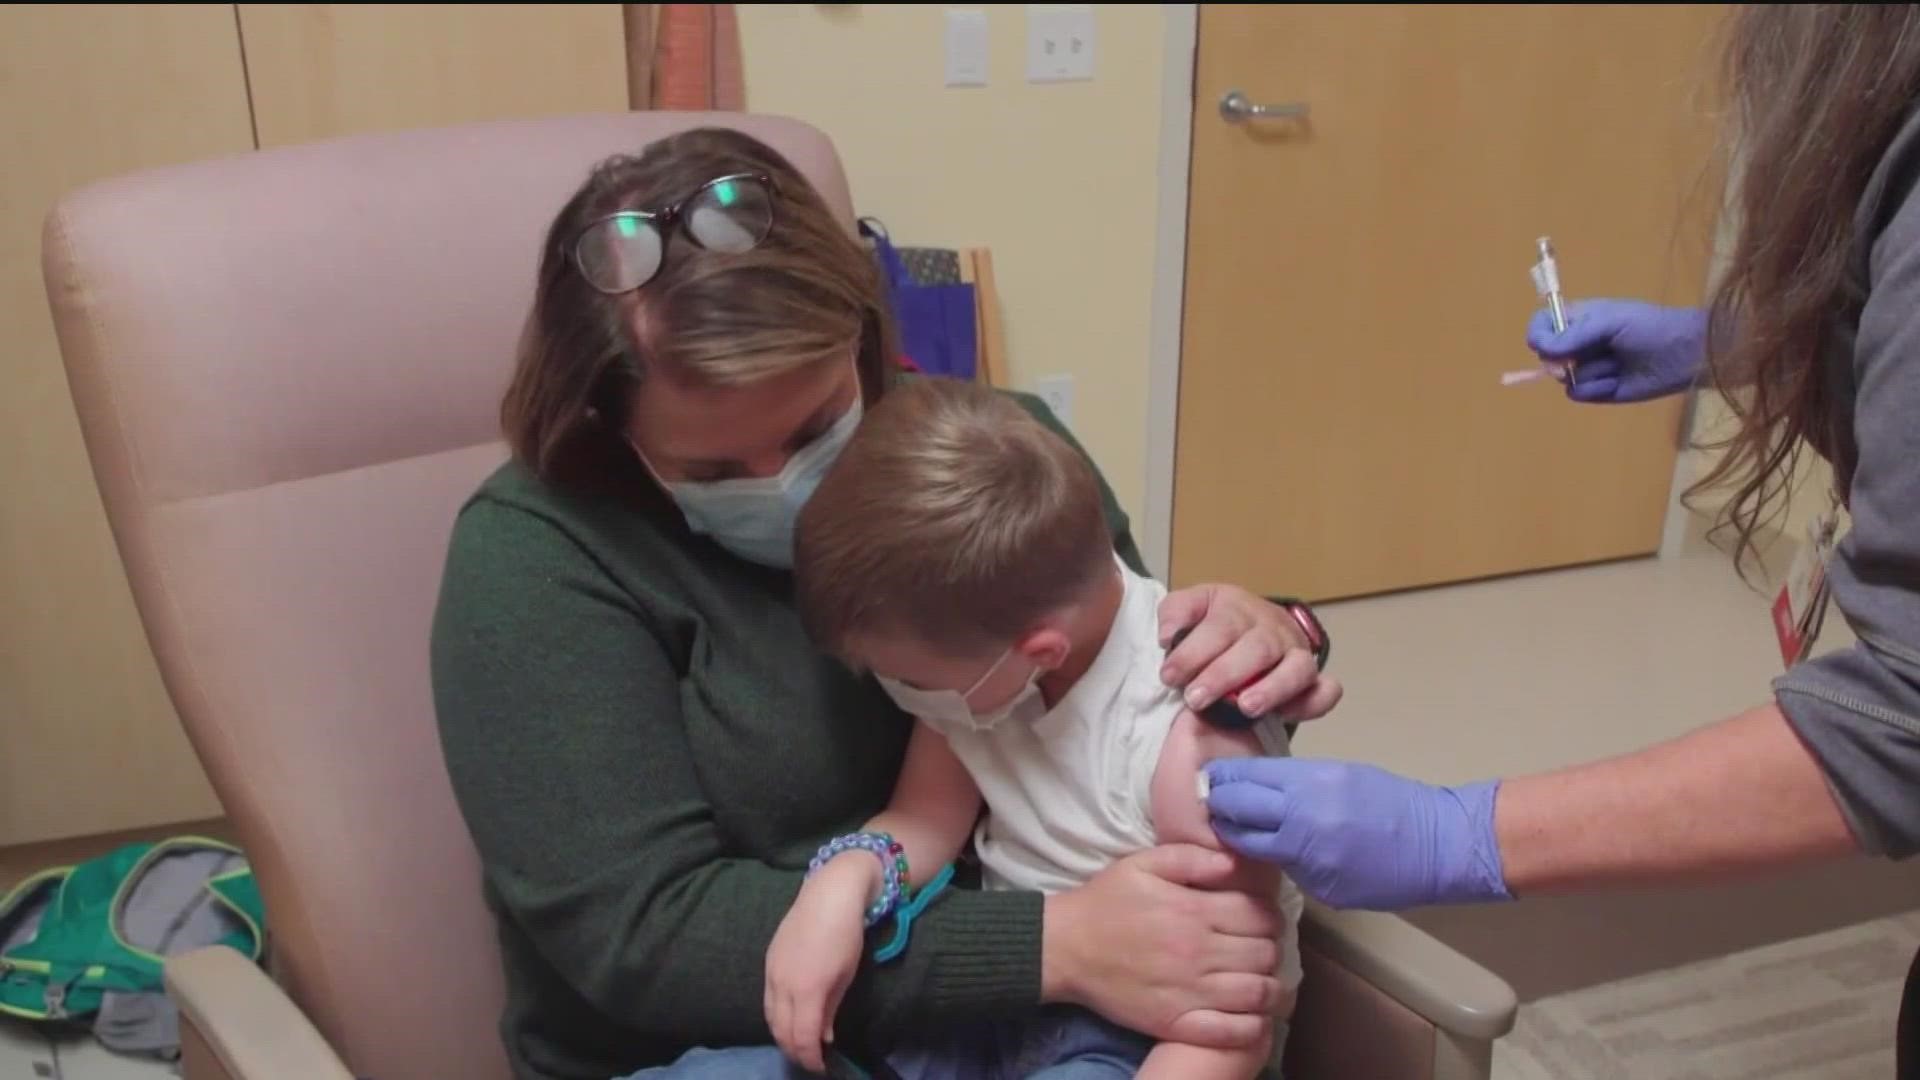 San Diego County is telling families to start making appointments now for children under 5 years of age to get COVID-19 vaccines.